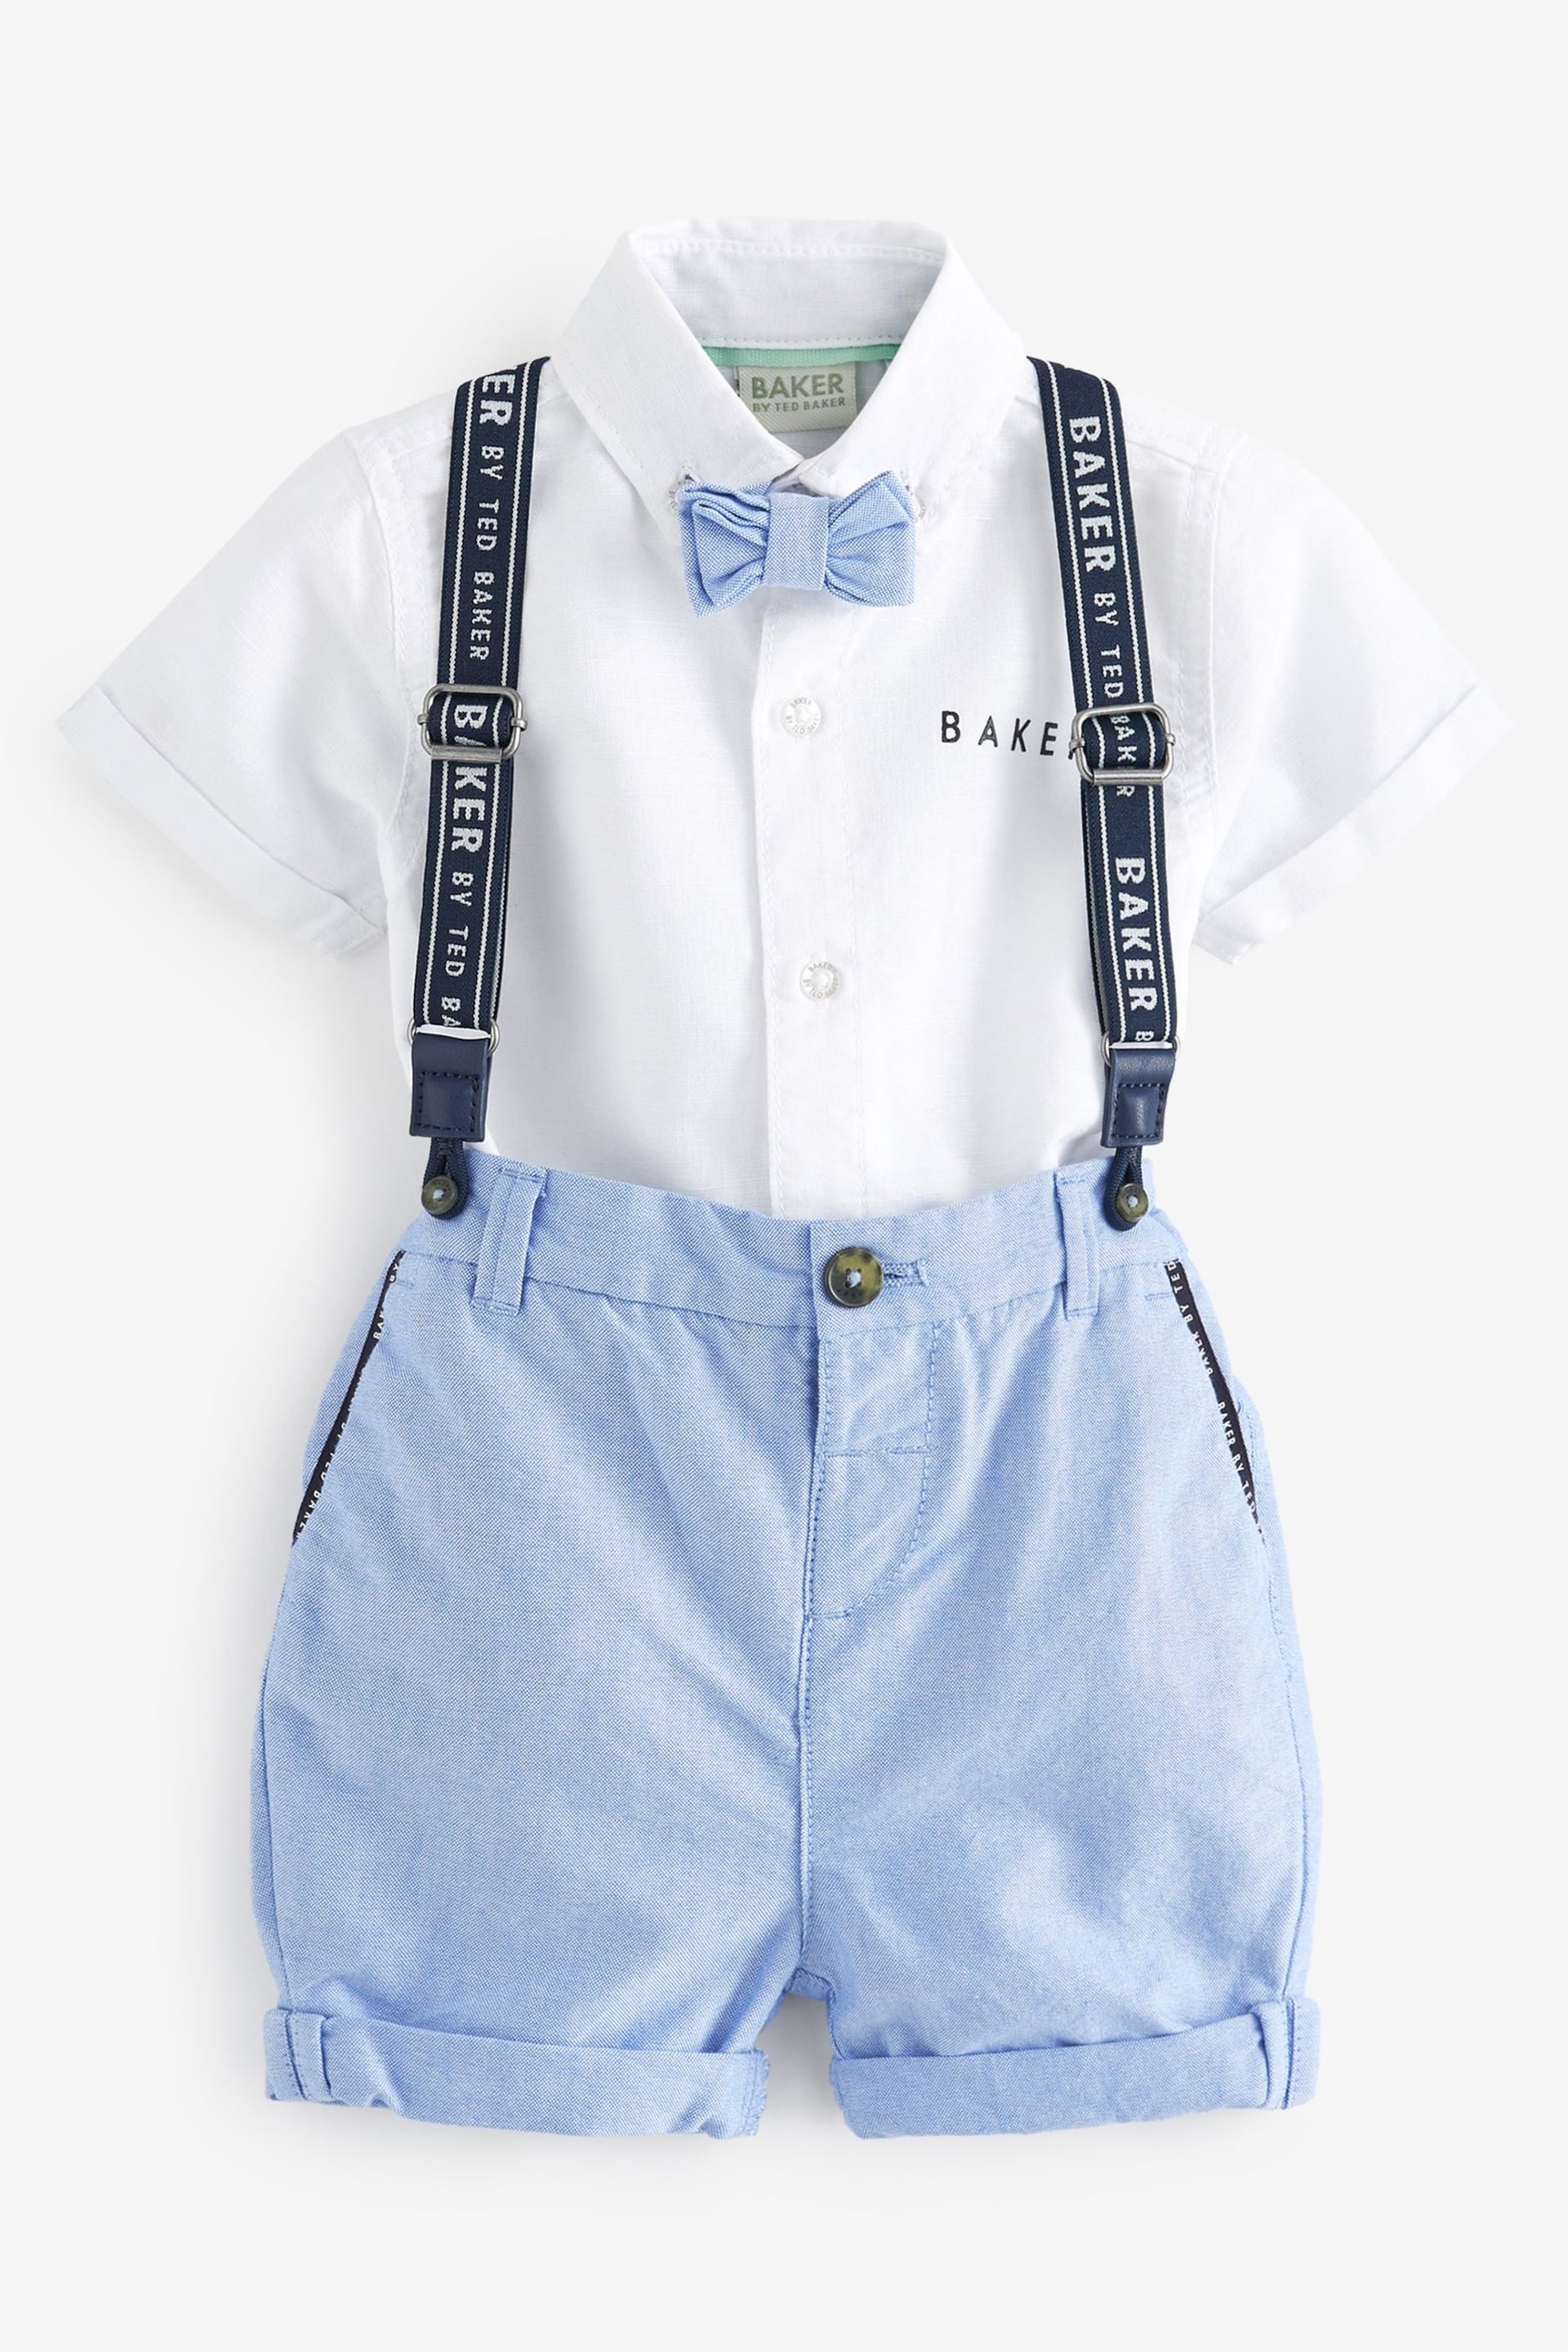 Baker by Ted Baker Shirt, Shorts and Braces Set - Image 8 of 12